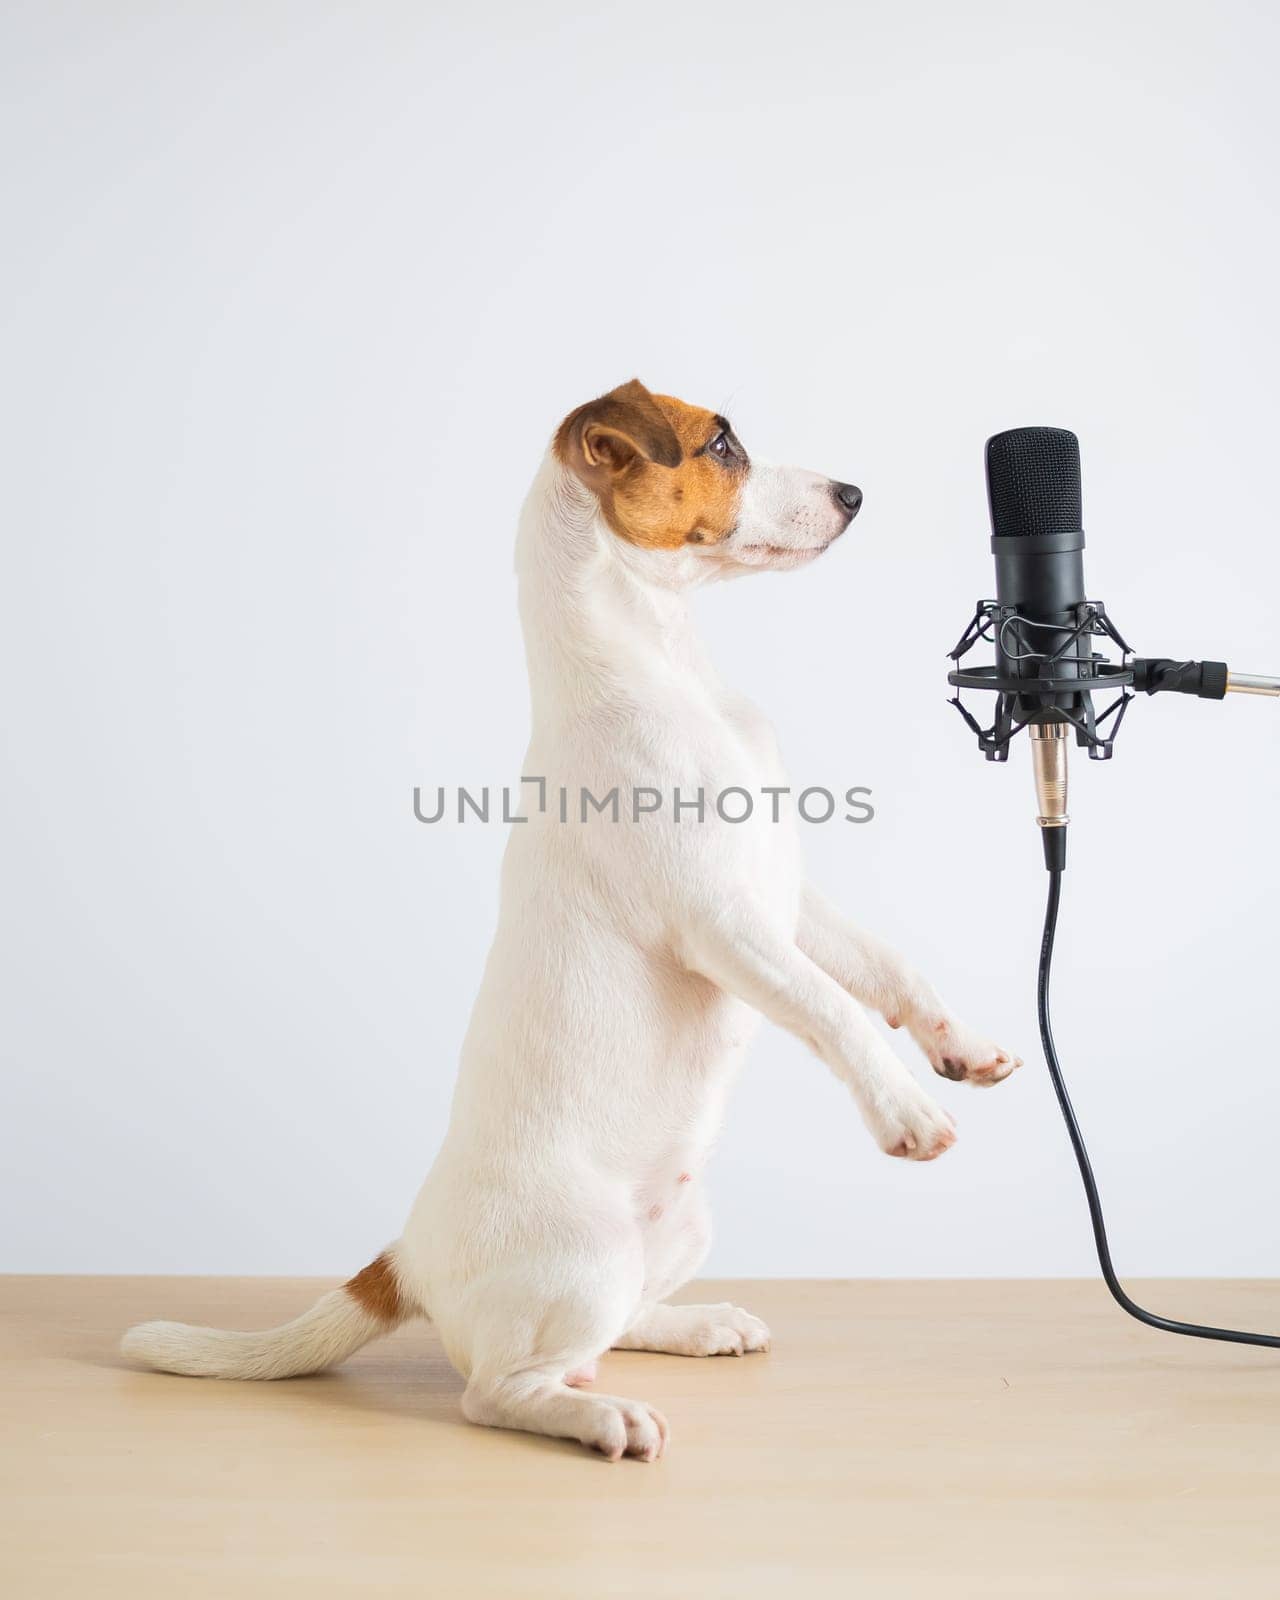 Jack russell terrier dog stands on its hind legs in a pose to serve at the microphone and is broadcasting on a white background.